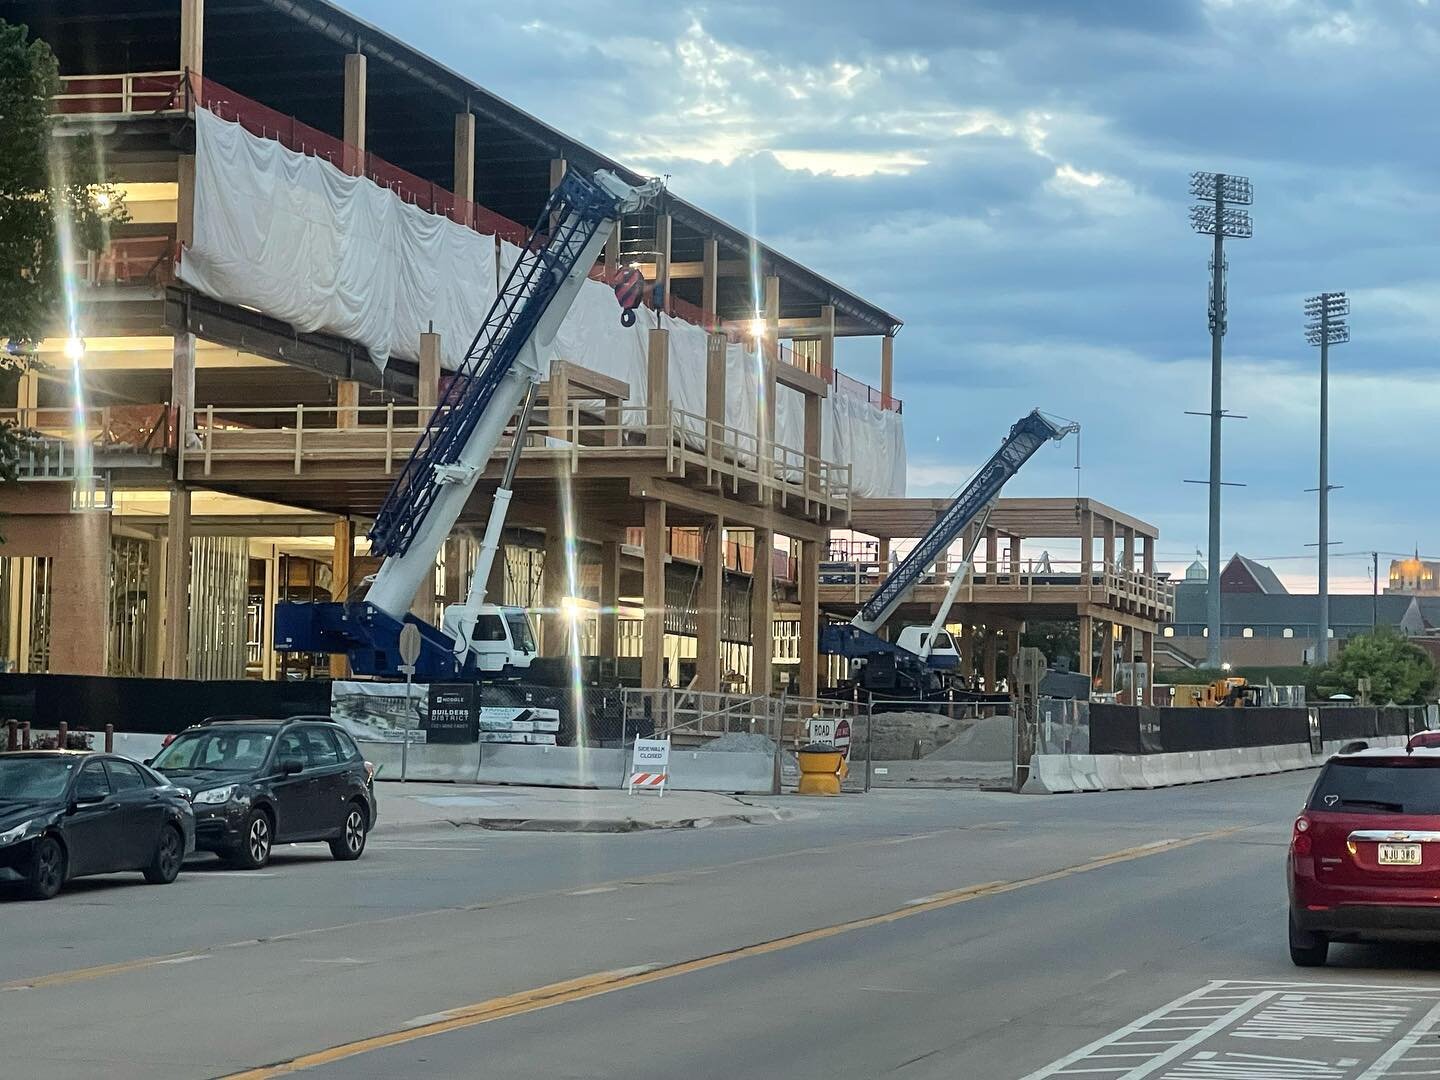 Getting close to completion on our Builders District mass timber install project in Omaha, Nebraska. 
&bull;
&bull;
&bull;
@timberlynegroup @strongtie @vaagentimbers @vaproshield @woodworksusa #masstimberconstruction #masstimber #masstimberconference